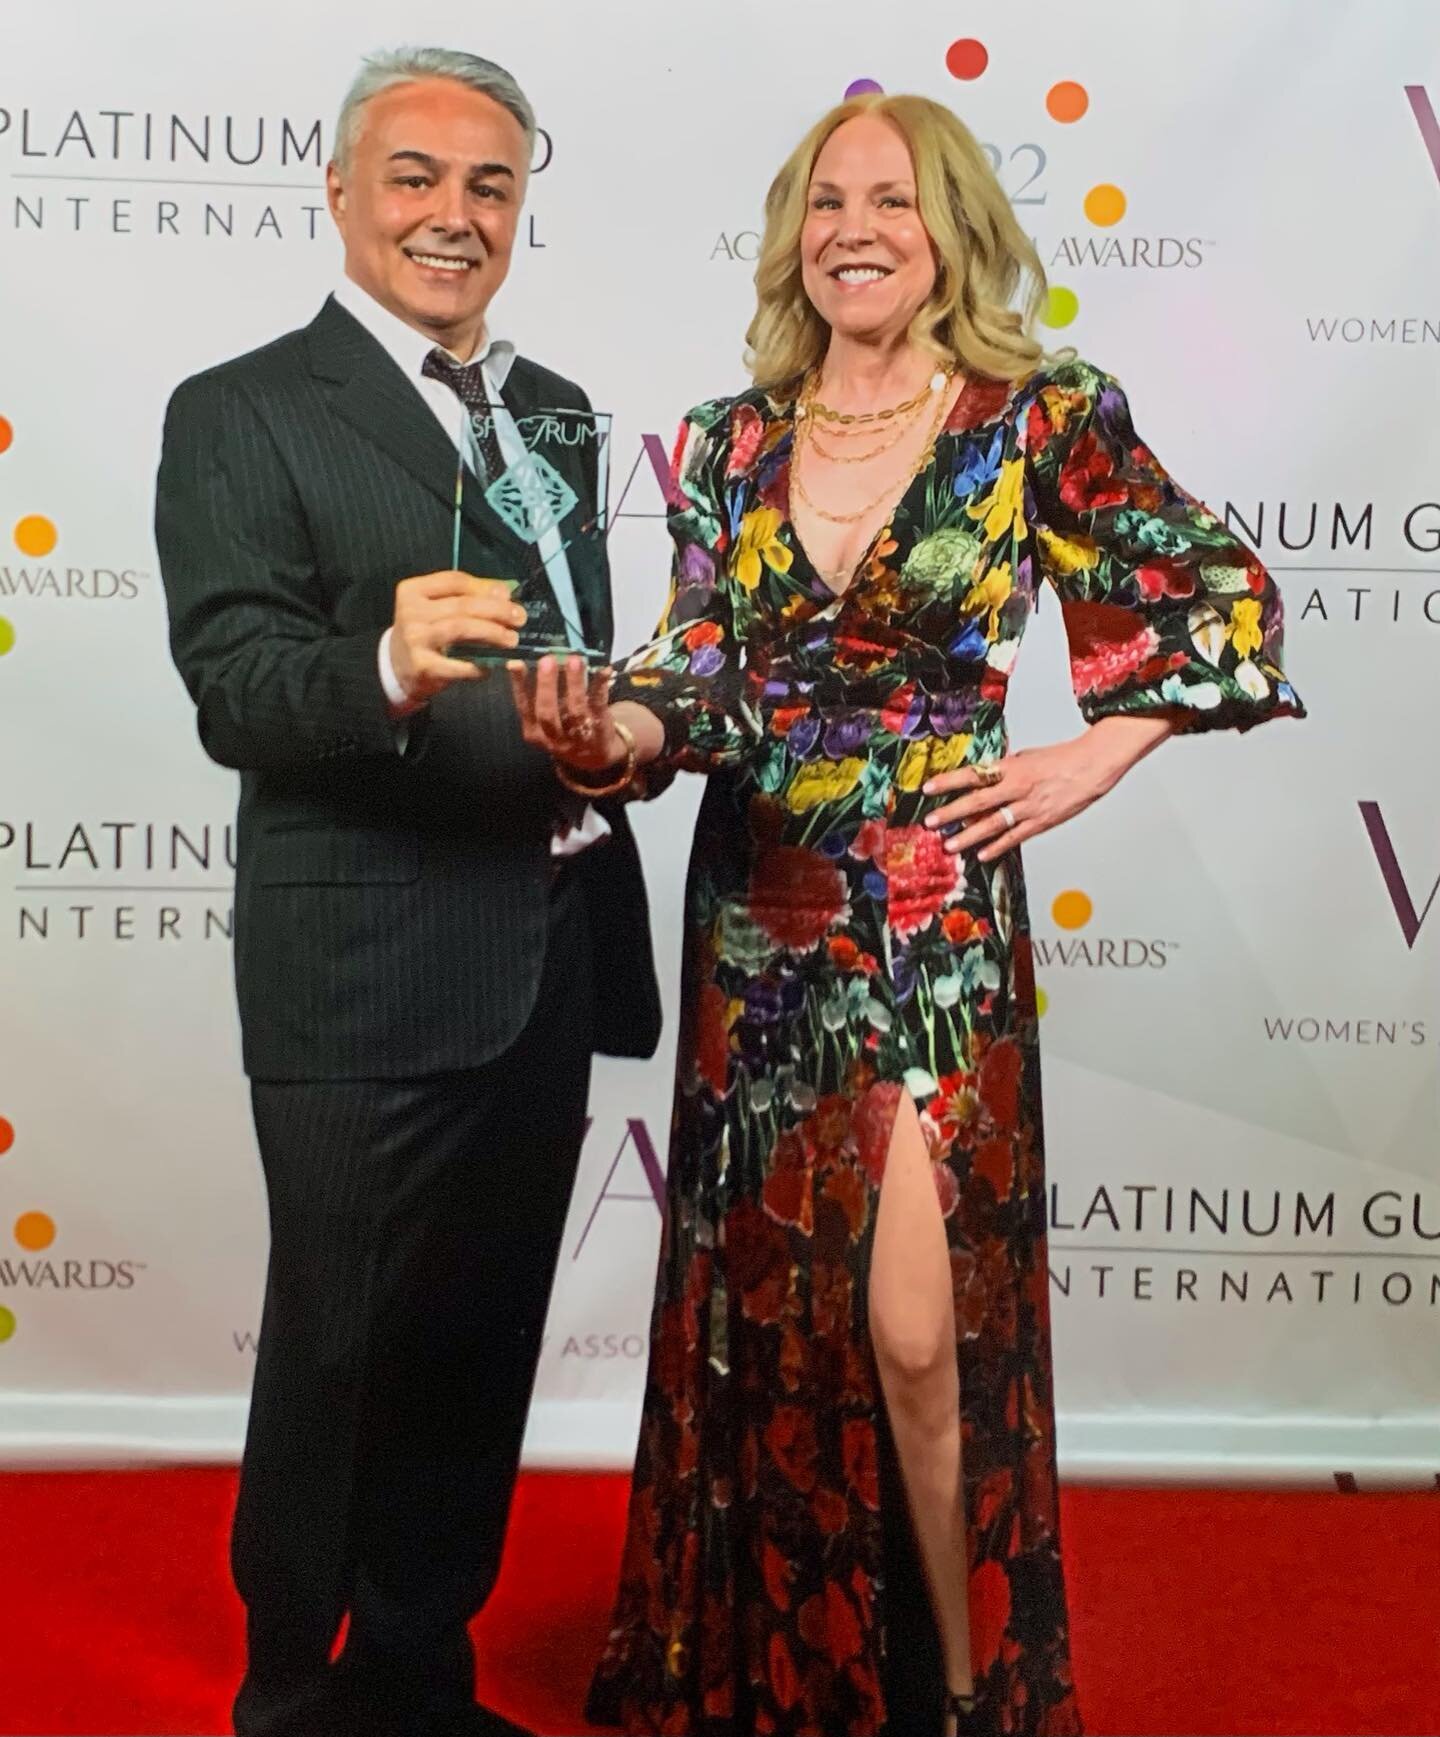 Thank you @agta_gems for an amazing evening at the Spectrum Awards Gala.  We had a blast!🚀 Also thank you to the judges @derekkatzenbach @bigdjeweler @jewelry.emporium for your thoughtful quotes on the QEII Earrings.
#BestUseOfColorAgta
SpectrumAwar